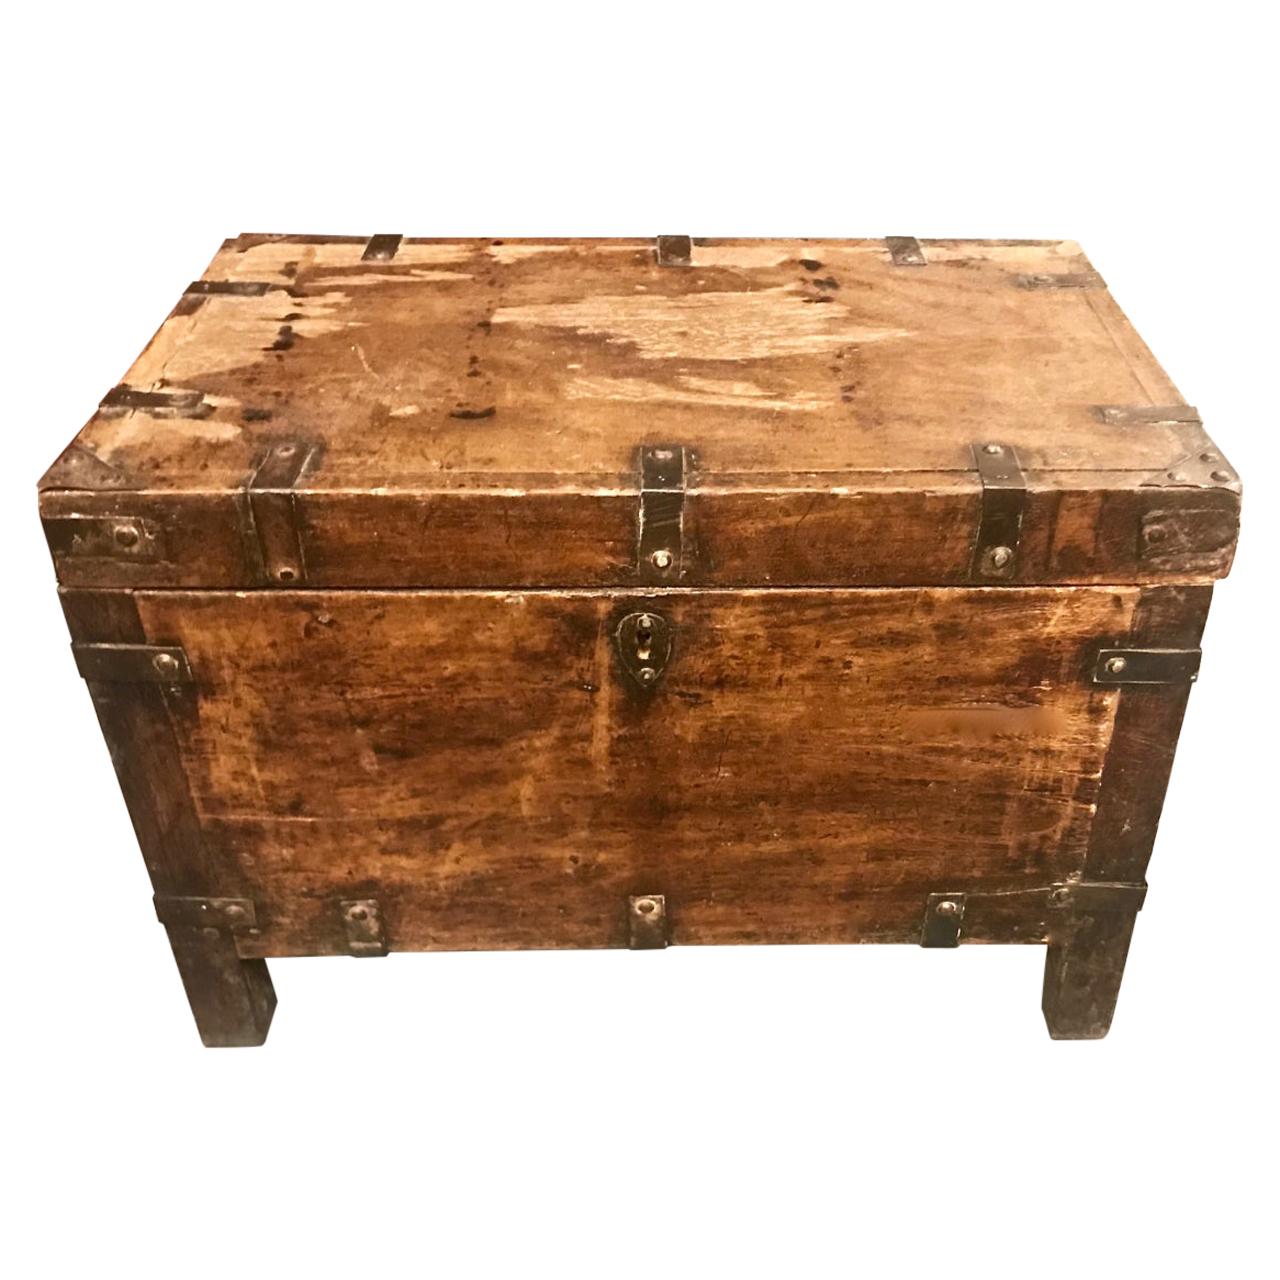 Spanish Colonial Trunk, 19th Century